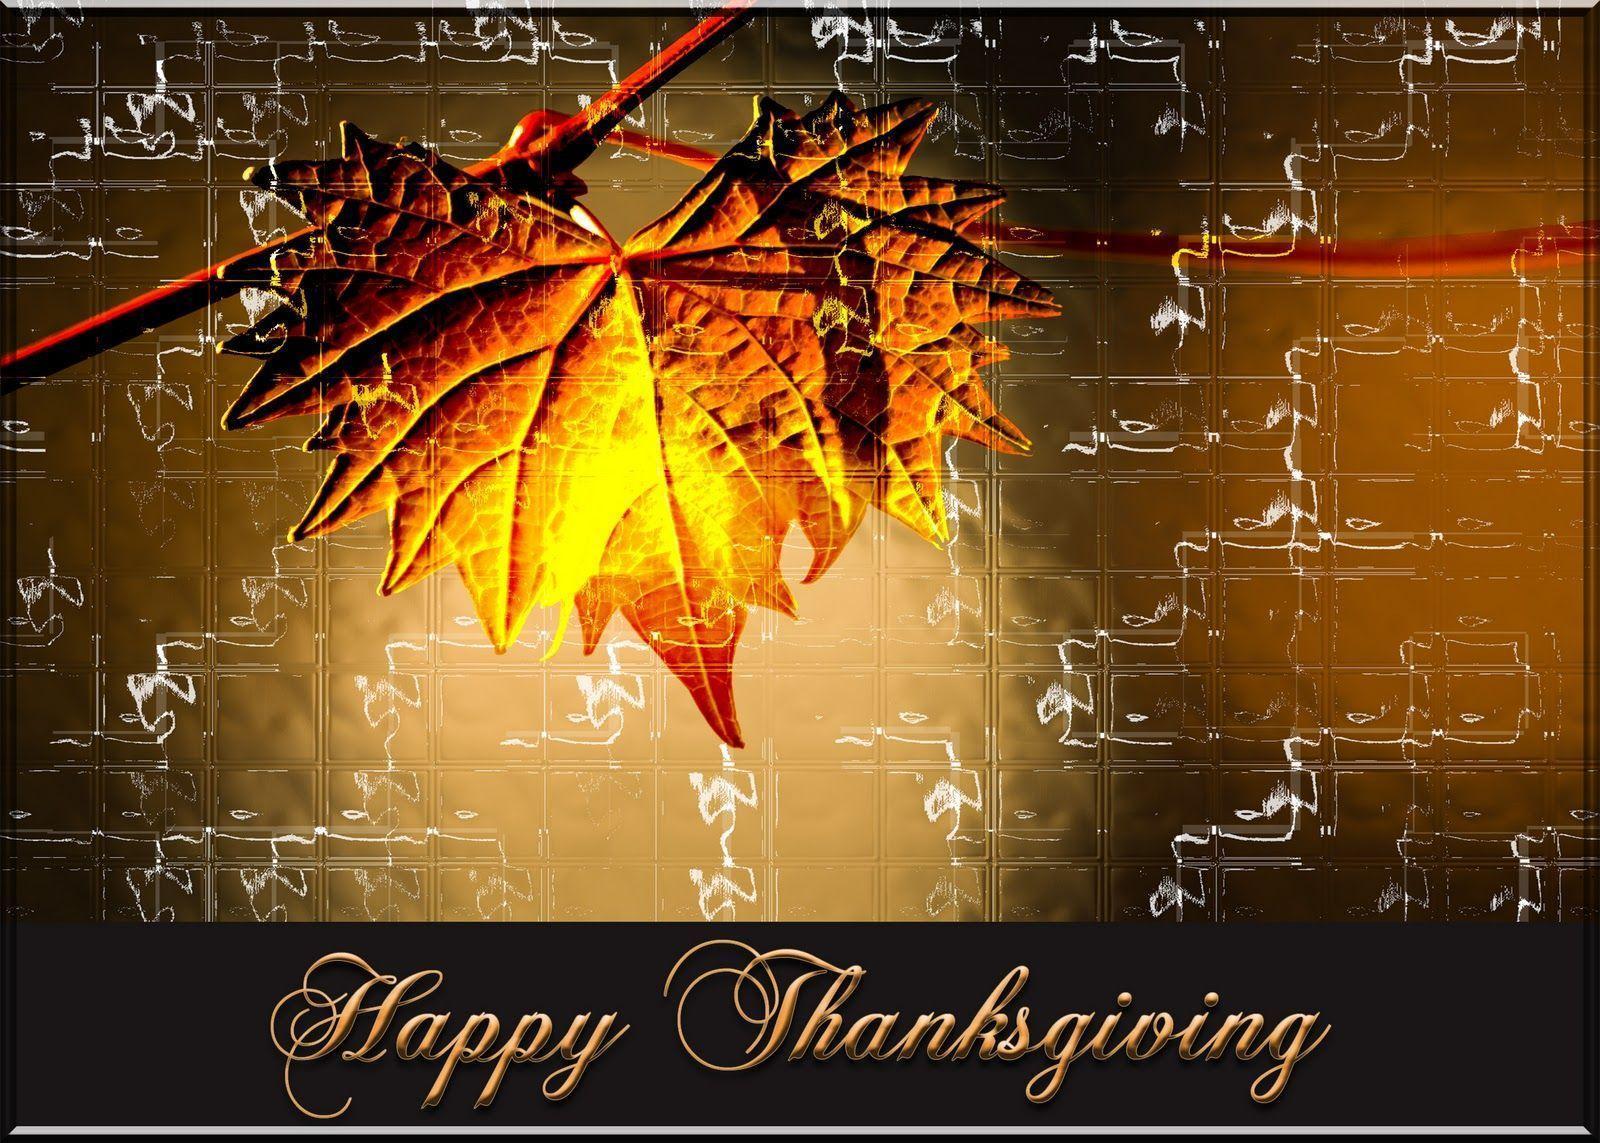 Free Happy Thanksgiving Wallpaper 37706 High Resolution. download